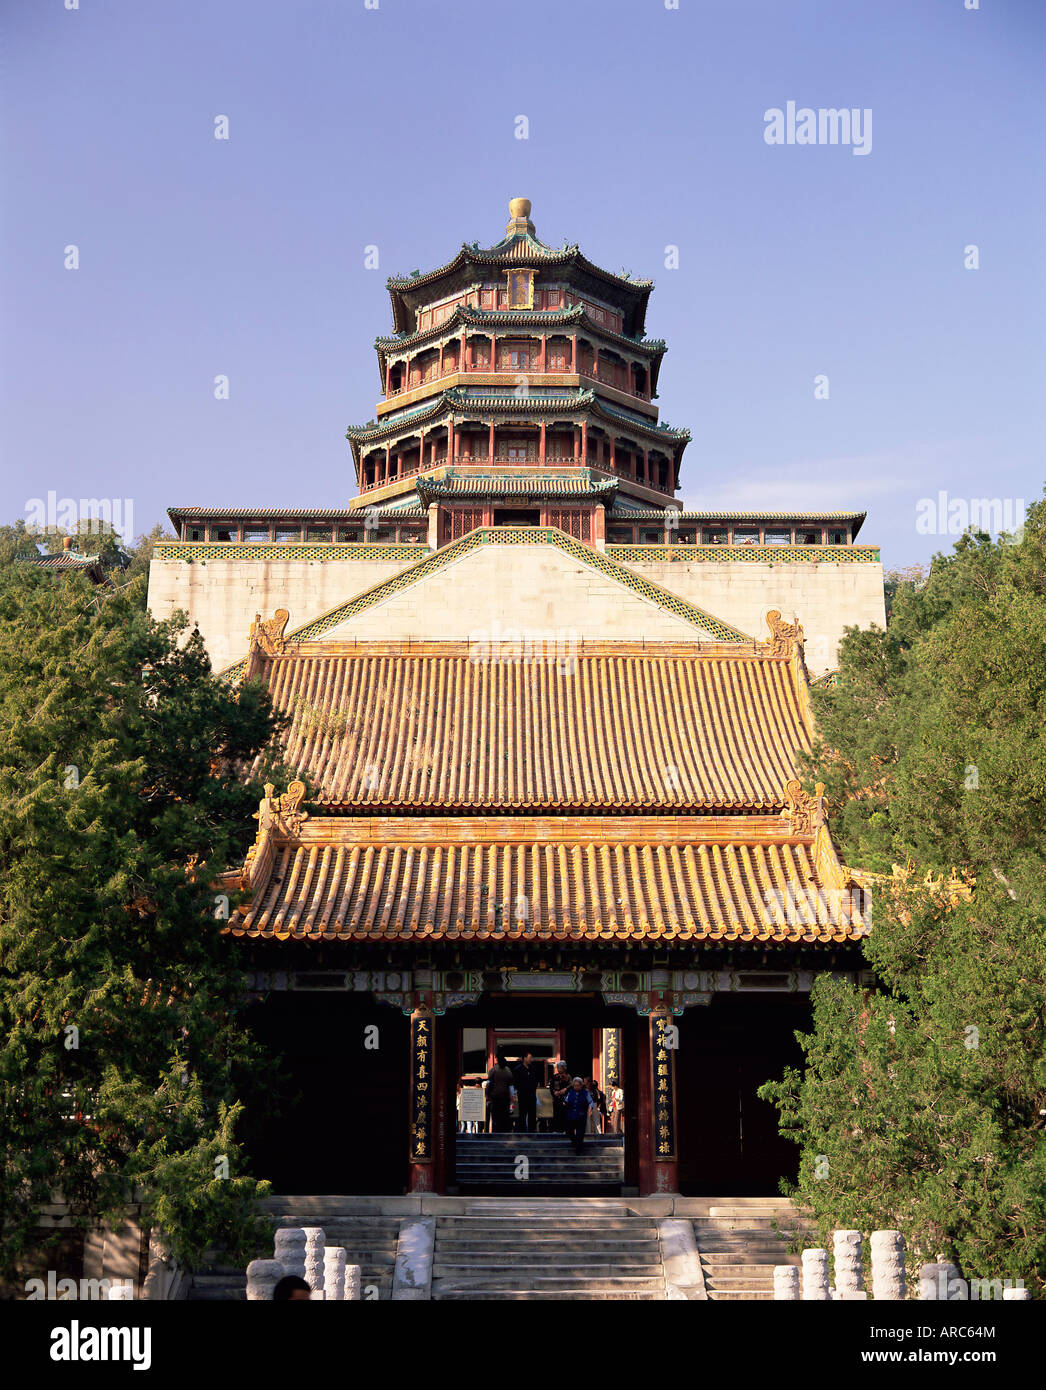 Qing architecture, Huihai Si, Sea of Wisdom temple, the Summer Palace, Beijing, China, Asia Stock Photo